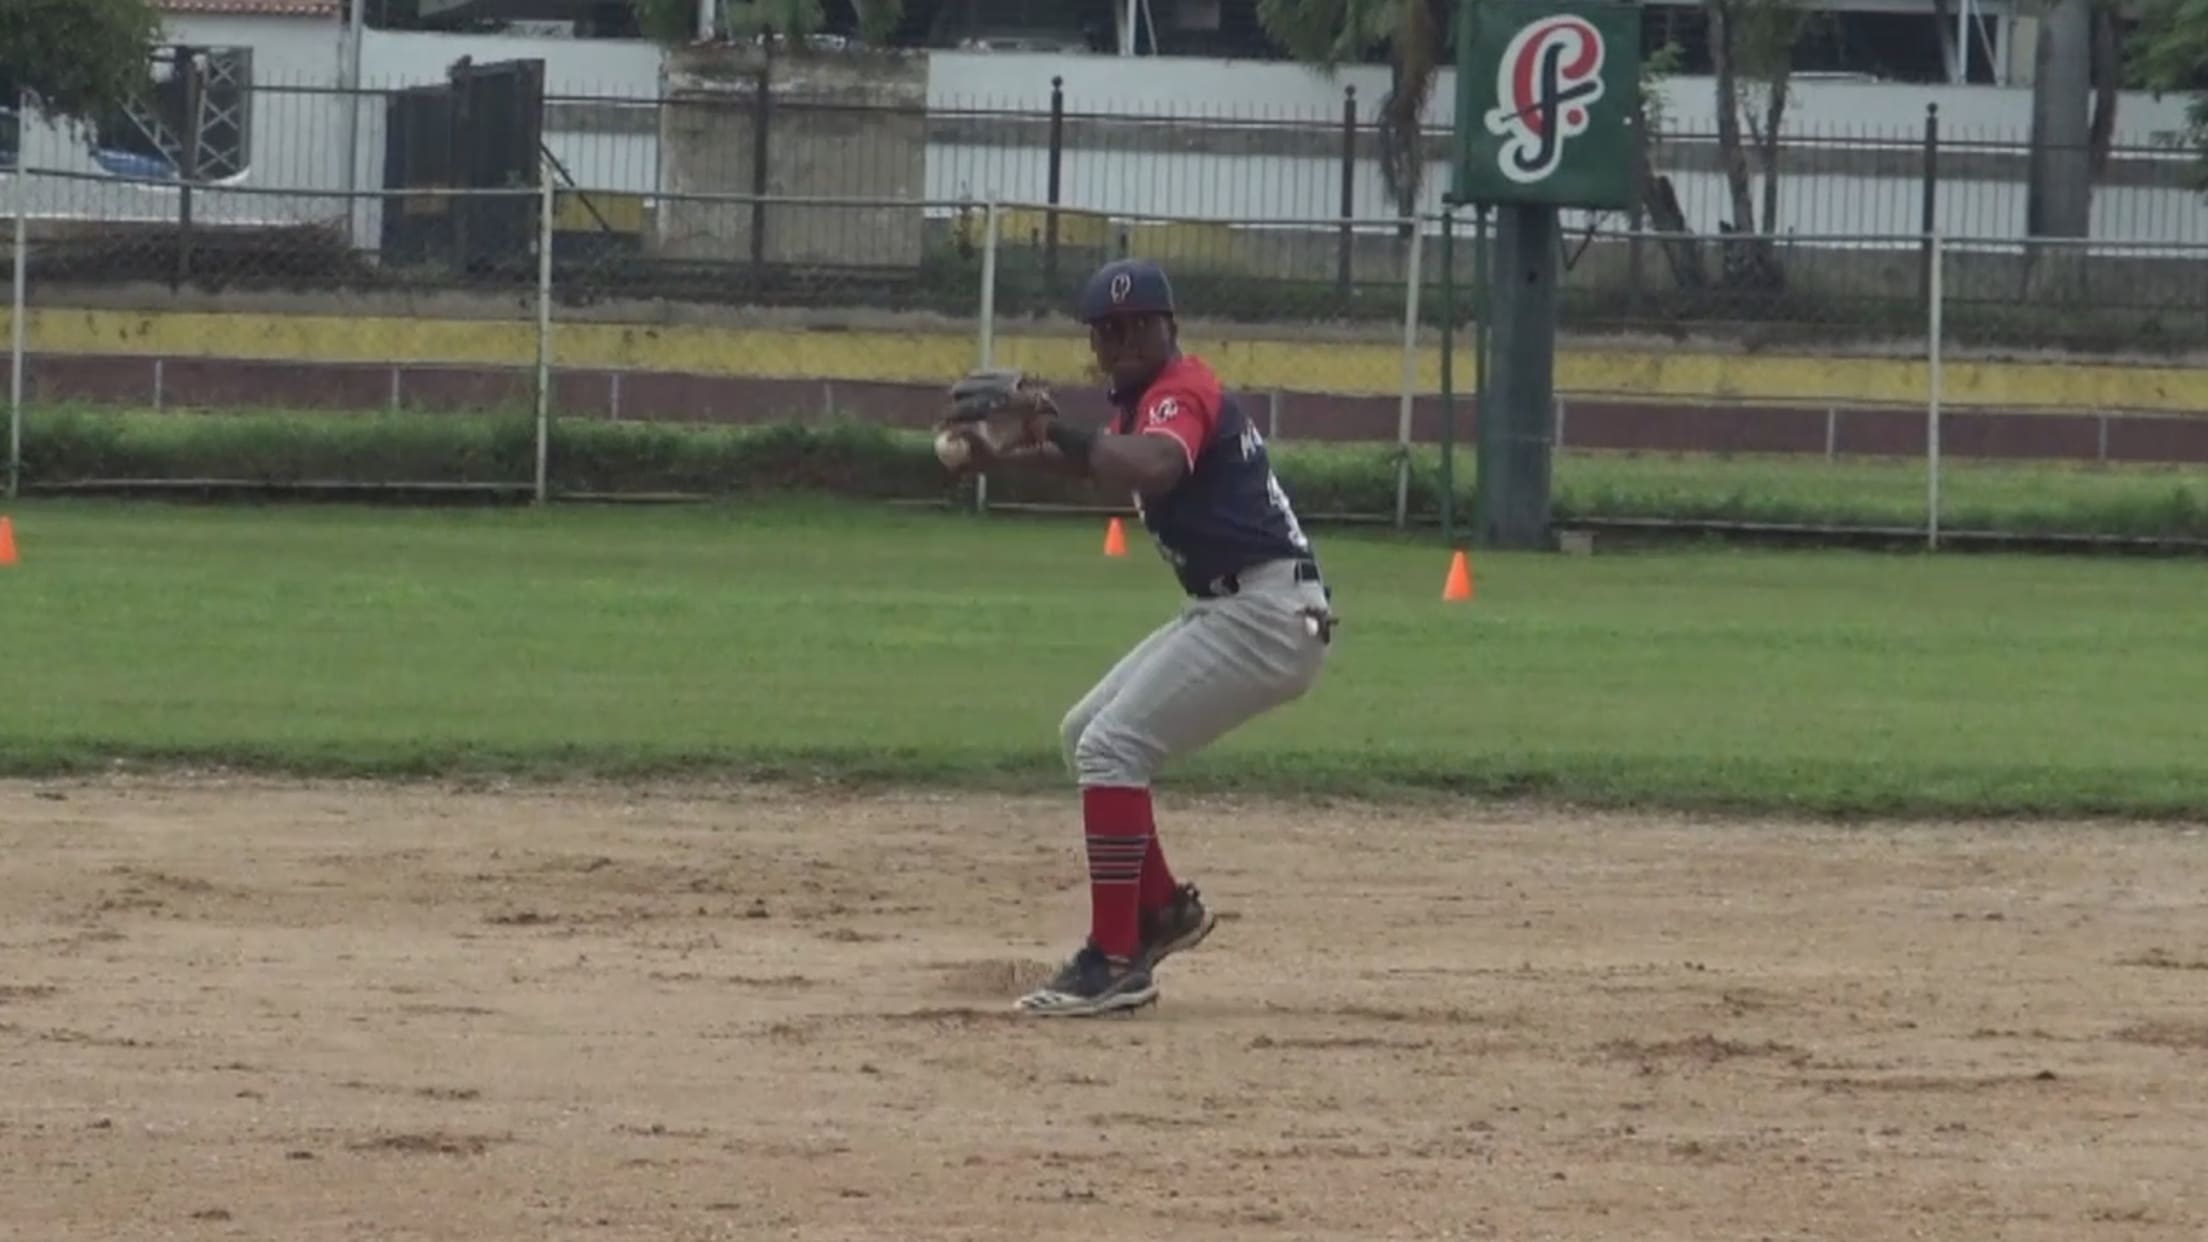 Top Int'l Prospects: Orozco, SS